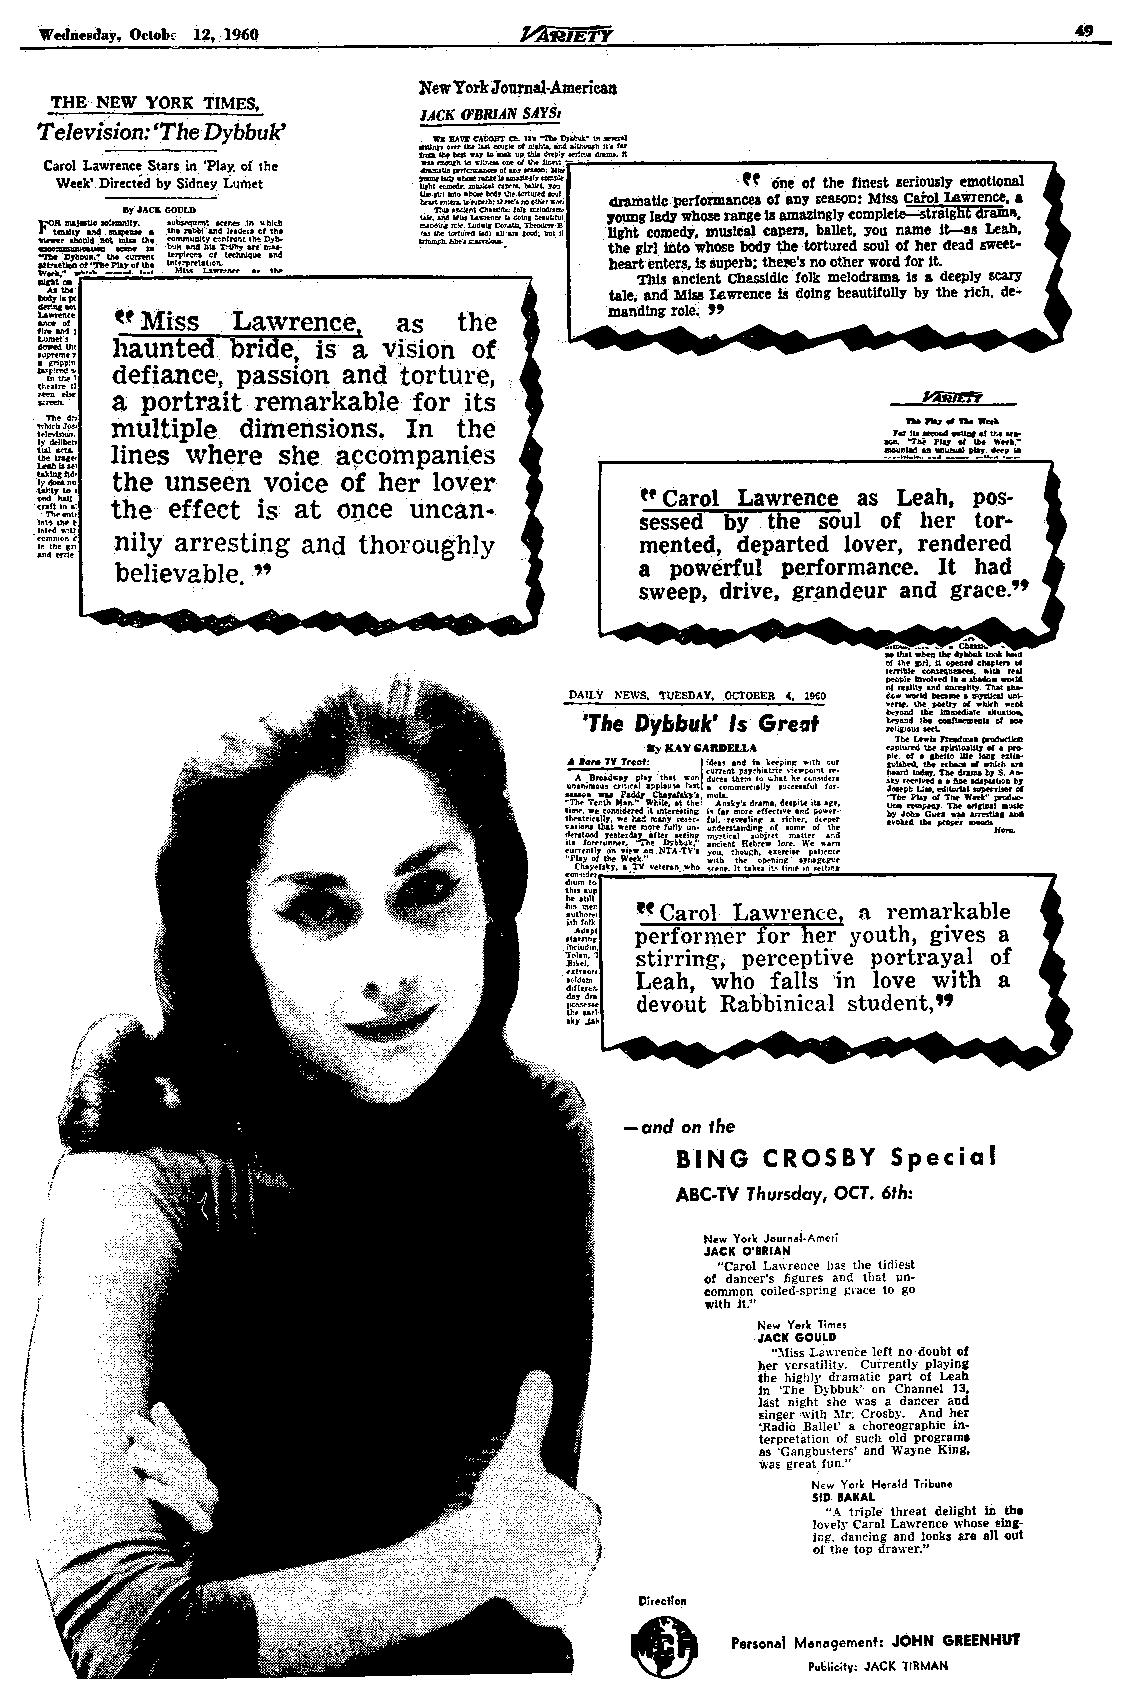 Thumbnail image of a page from Variety